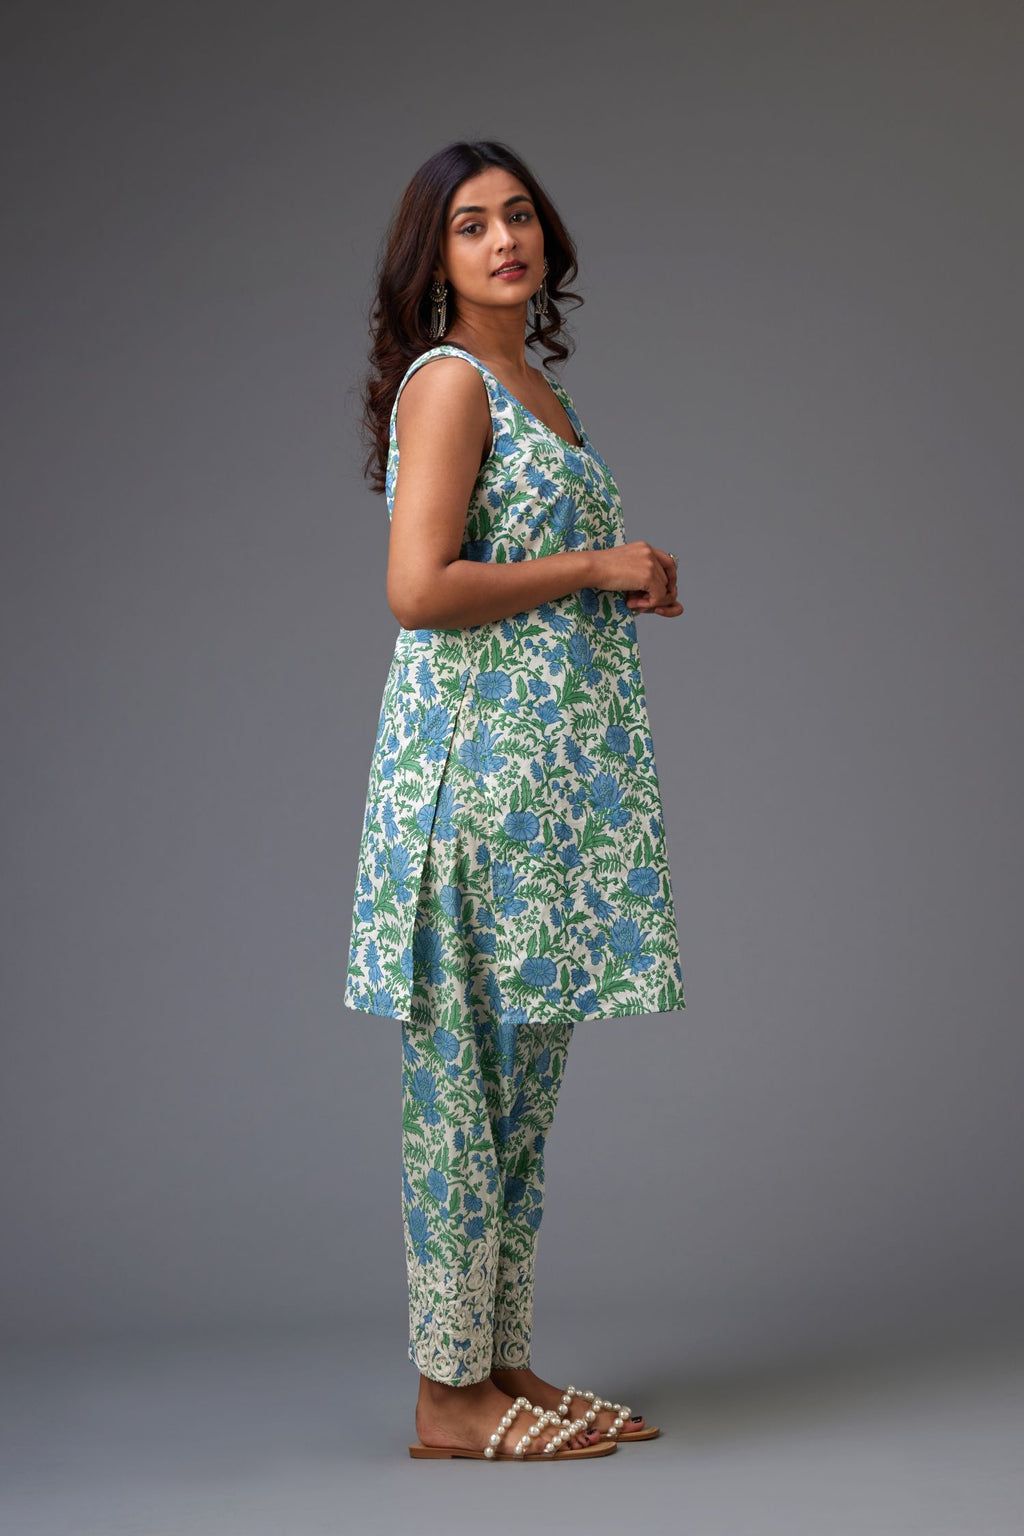 Off-white silk chanderi short kurta set with all-over assorted embroidered flowers, highlighted with sequins handwork.